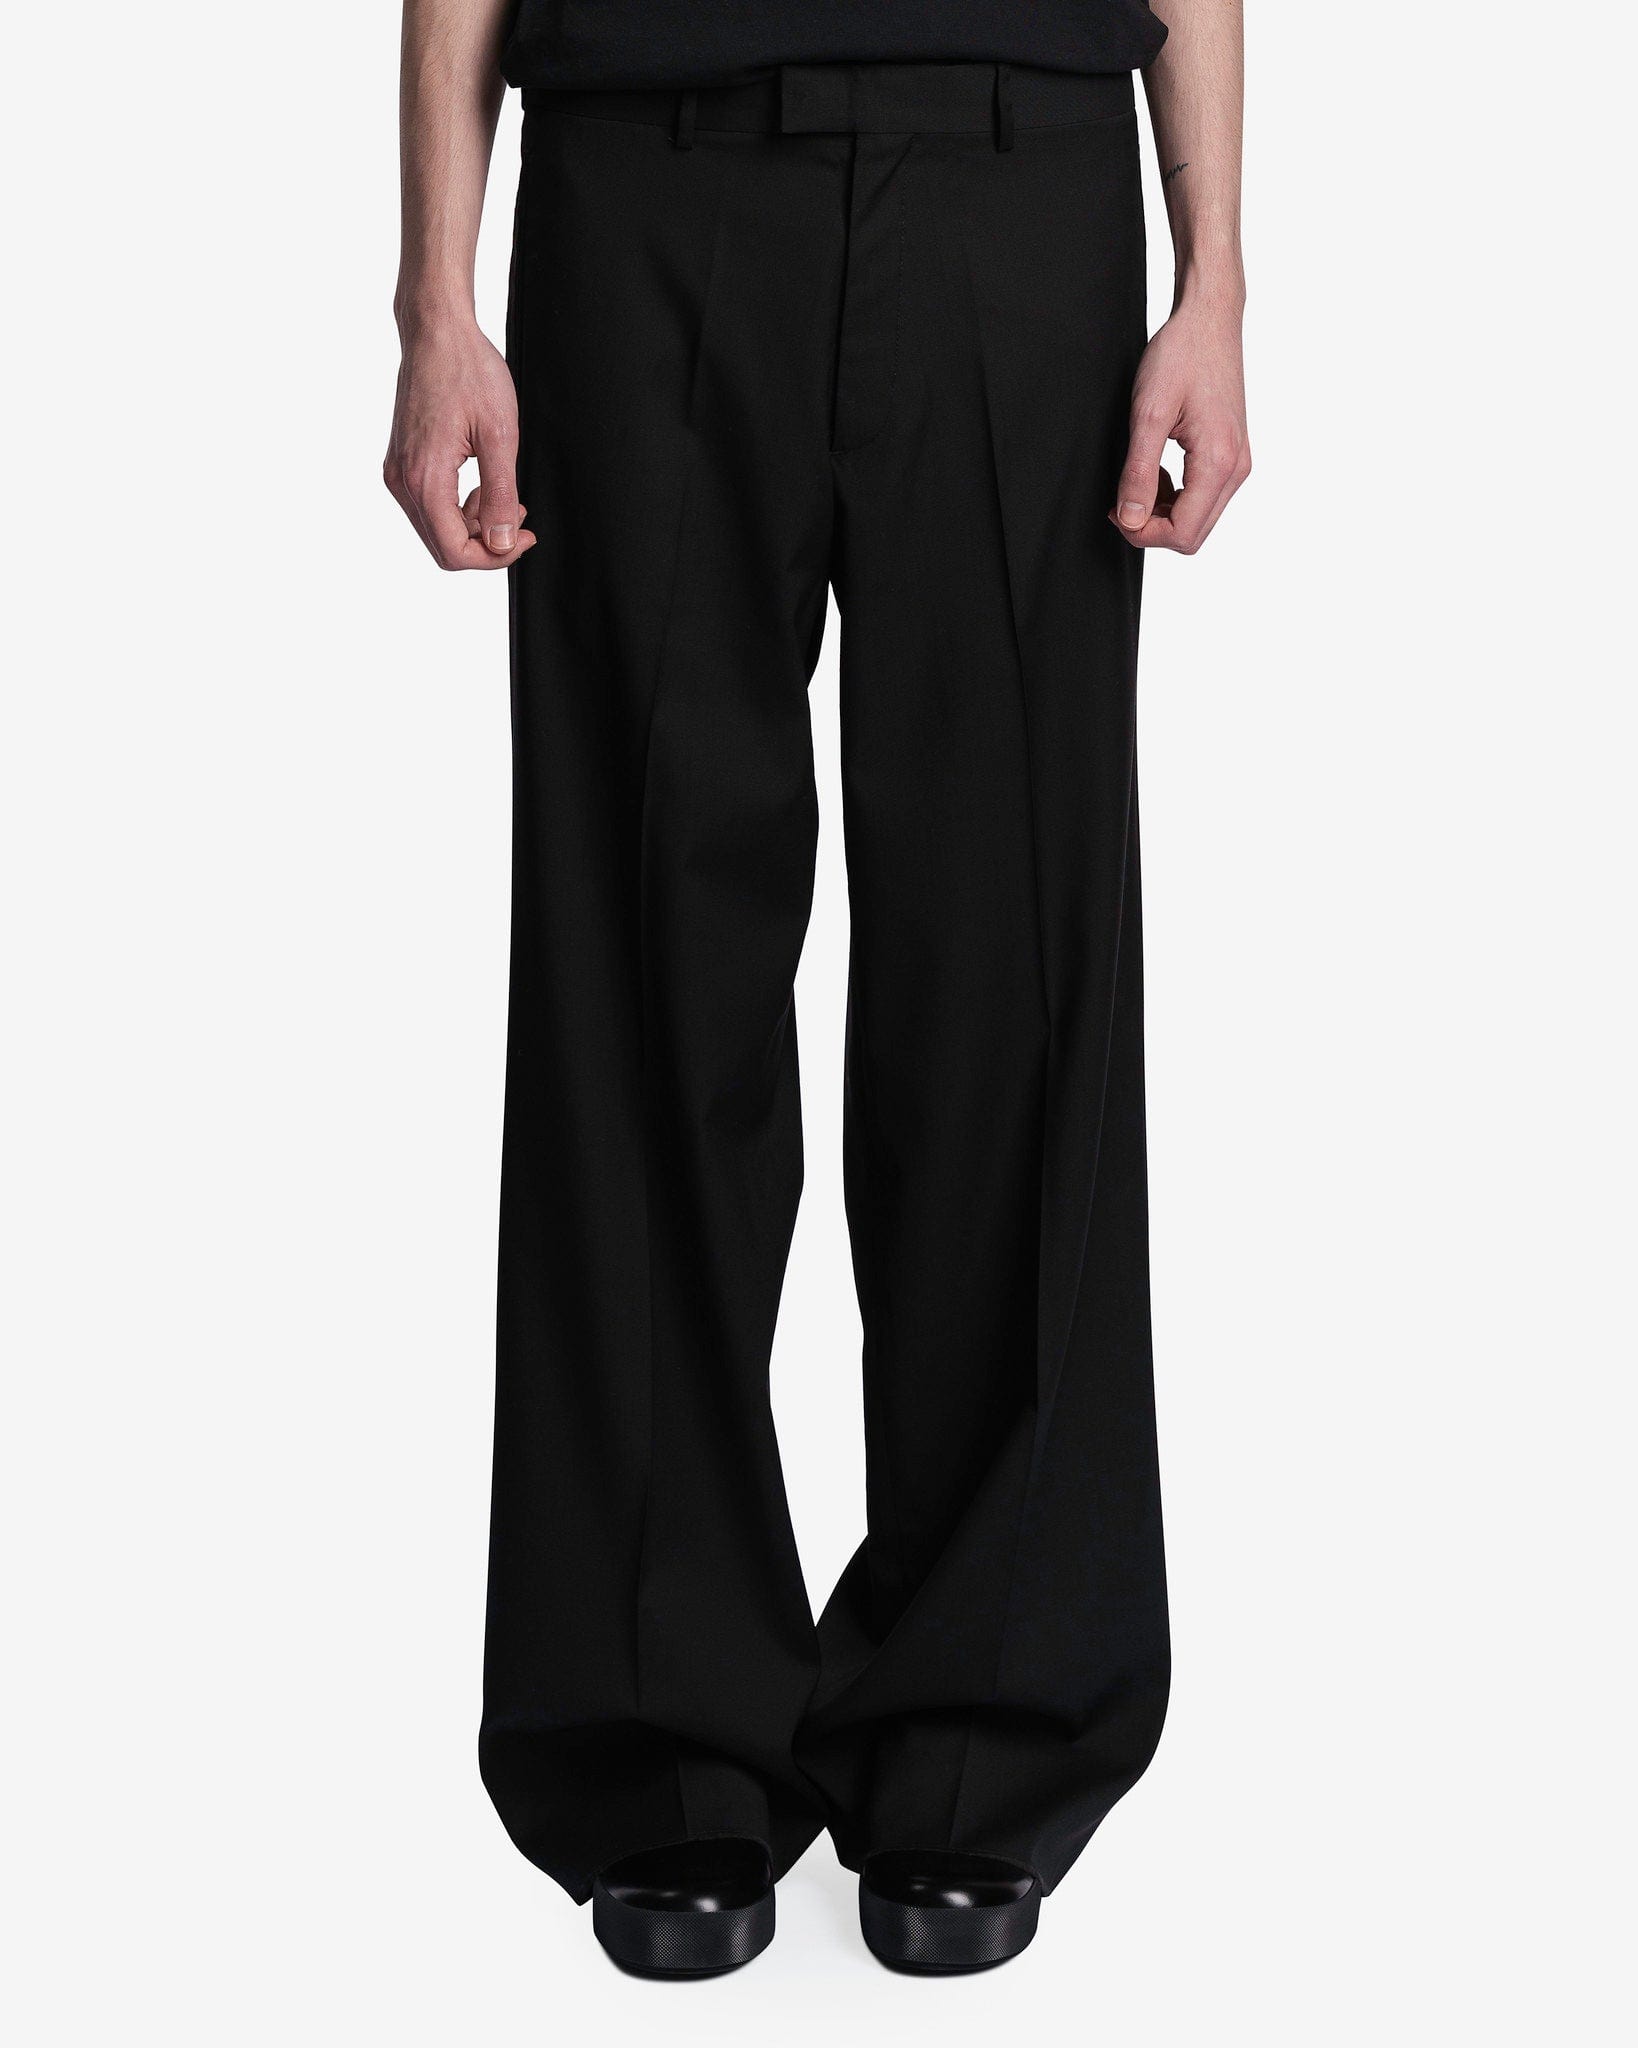 Raf Simons Men's Pants Classic straight pants with 2 Back Pockets in Black